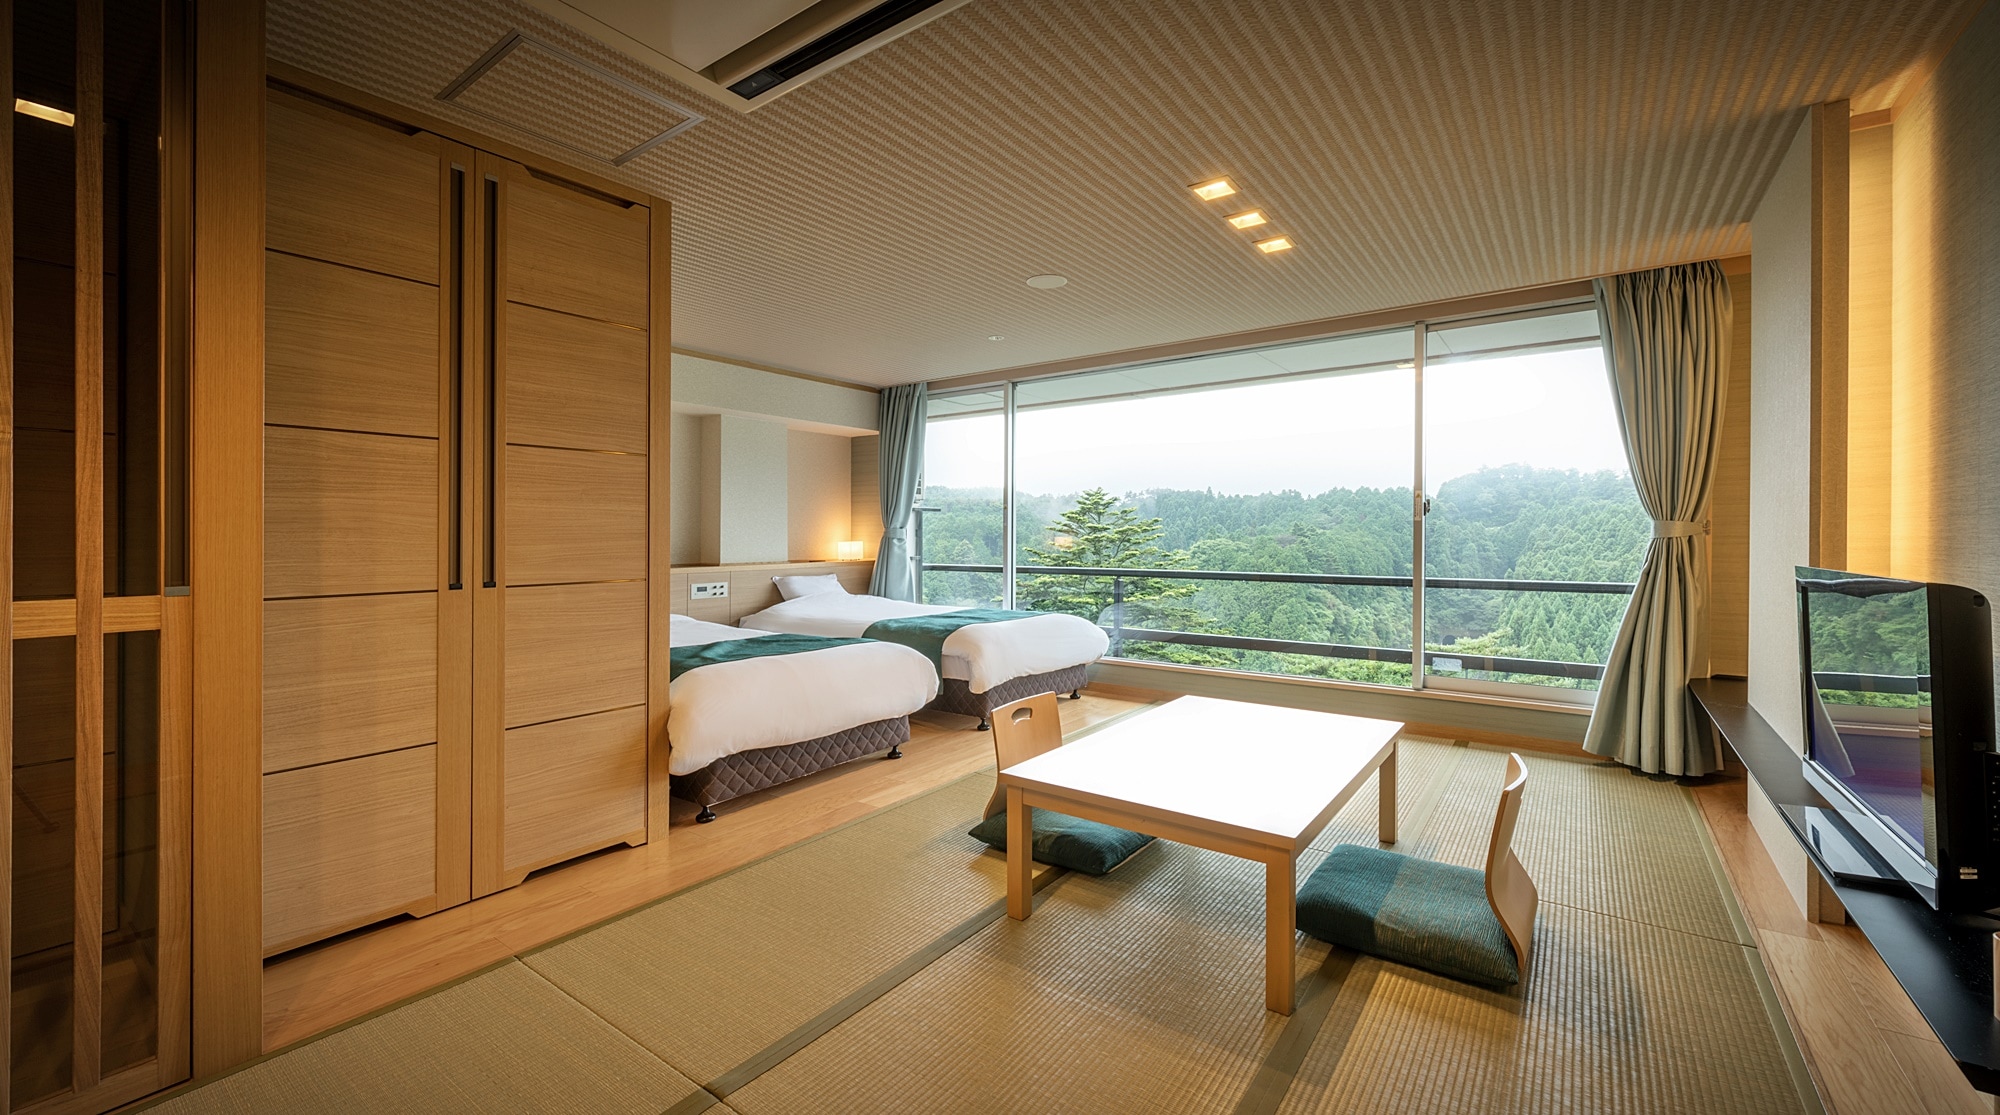 Hotel information and reservations for Hotel Matsushima Taikanso